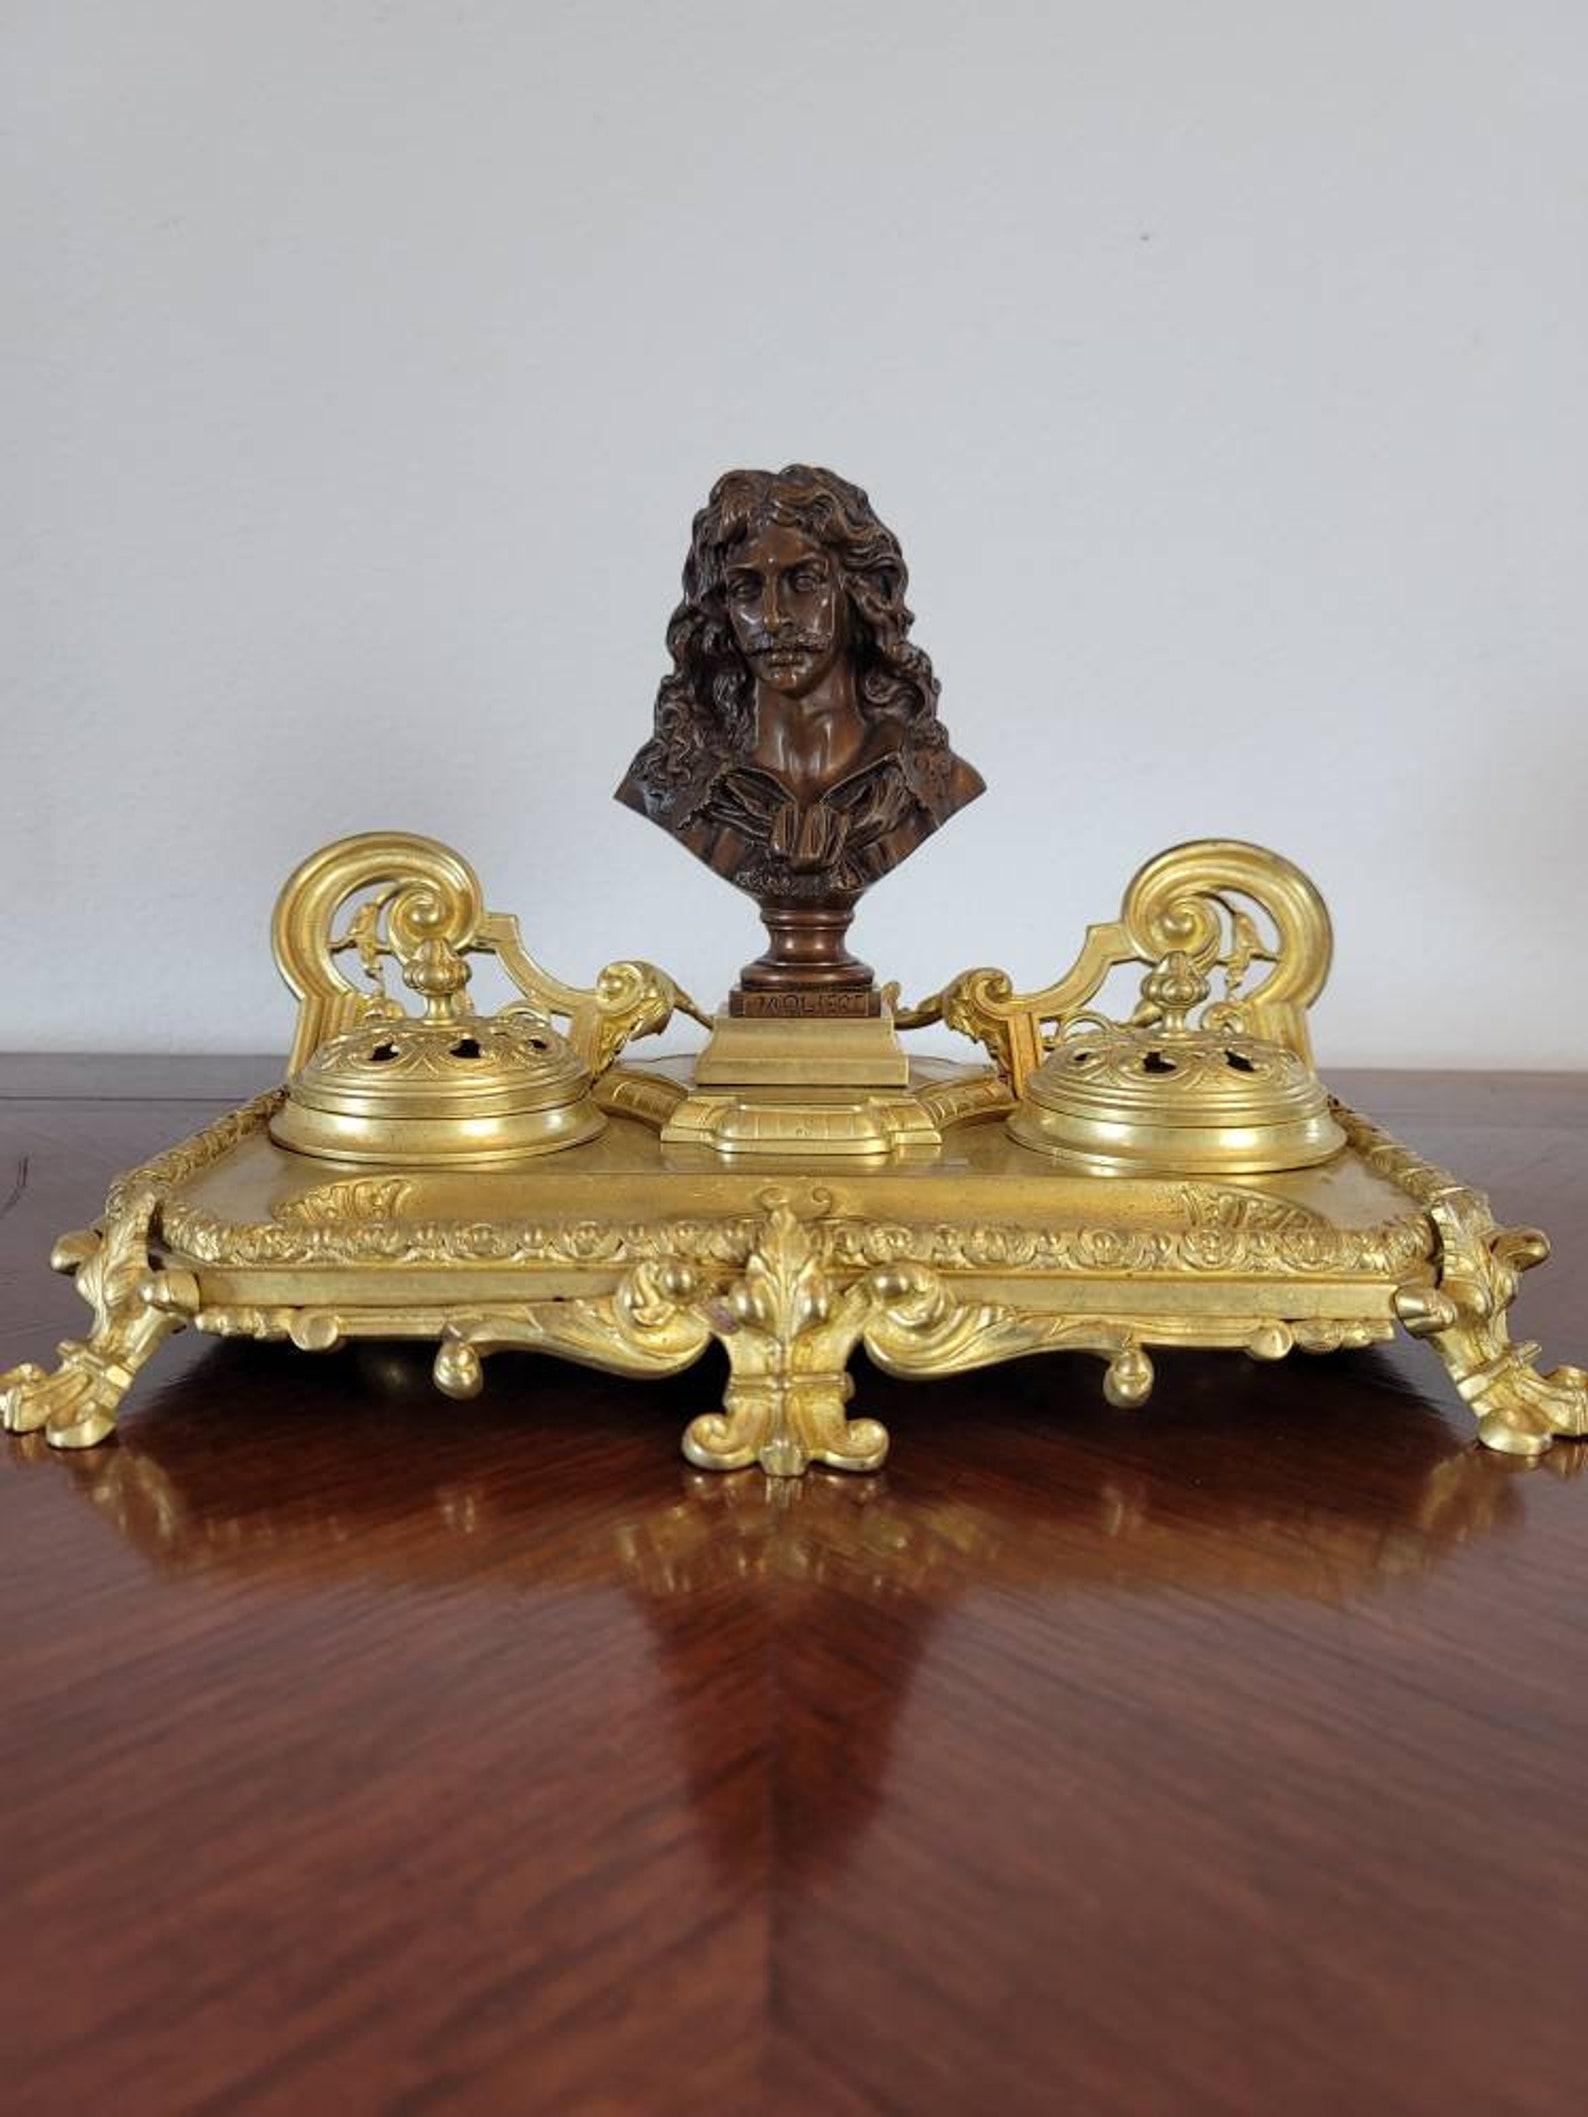 A most impressive fine quality antique Louis XV style French ormolu encrier / inkstand. 

Born in France in the 19th century, almost certainly Parisian work, exquisitely chased, chisled and sculpted gilded bronze, mounted with an exceptionally